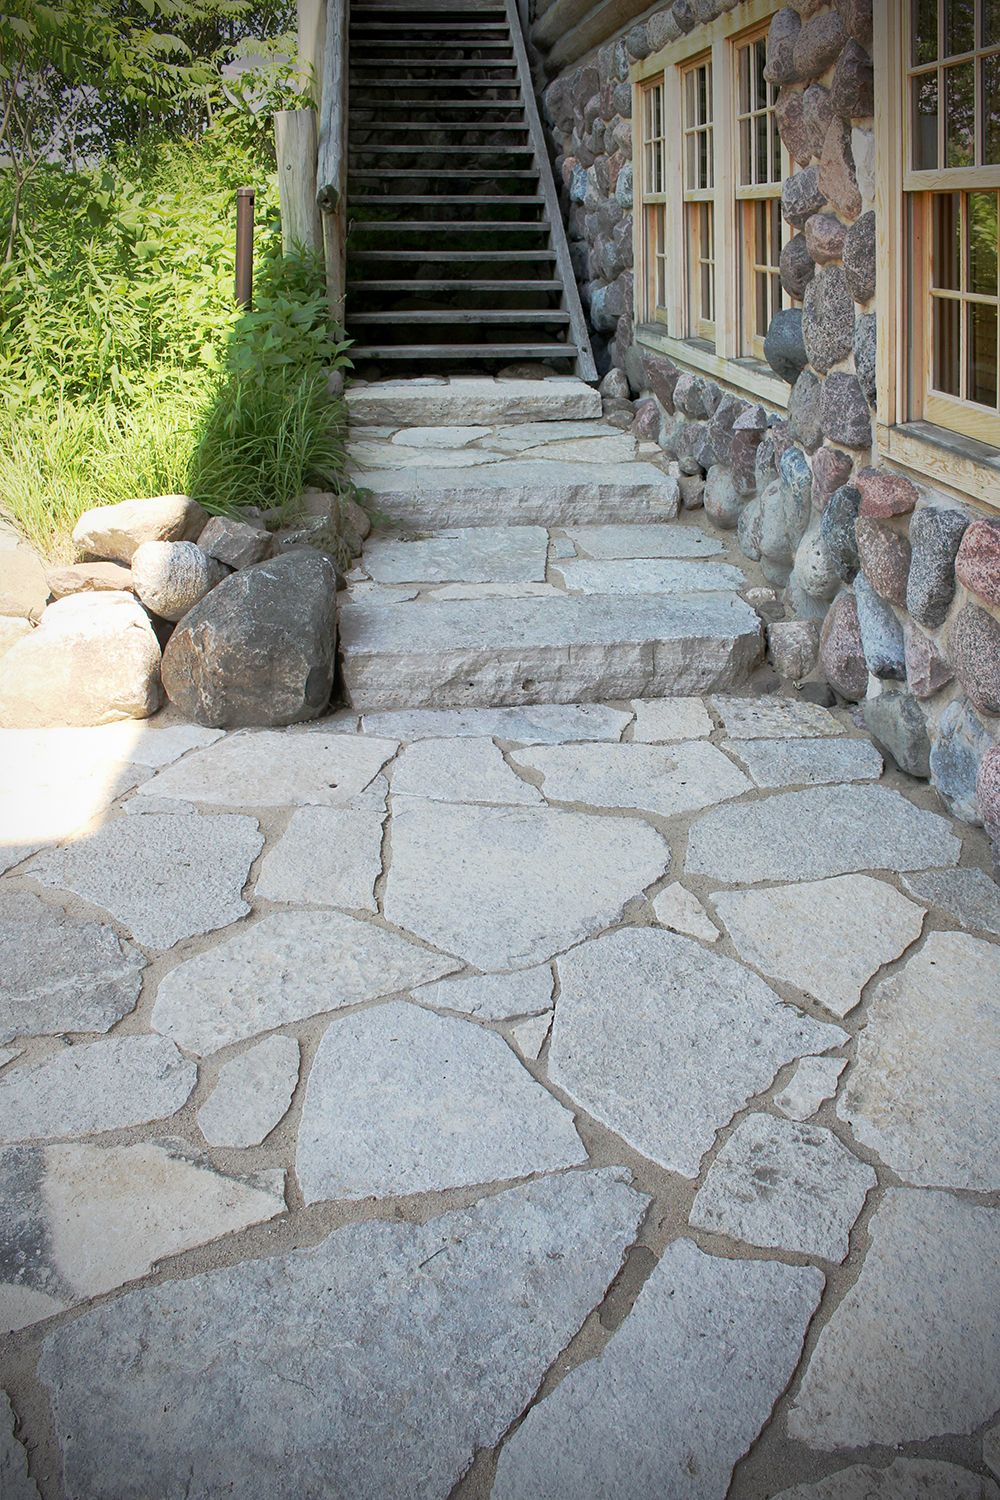 The Art of Choosing Patio Stones for Your Outdoor Space